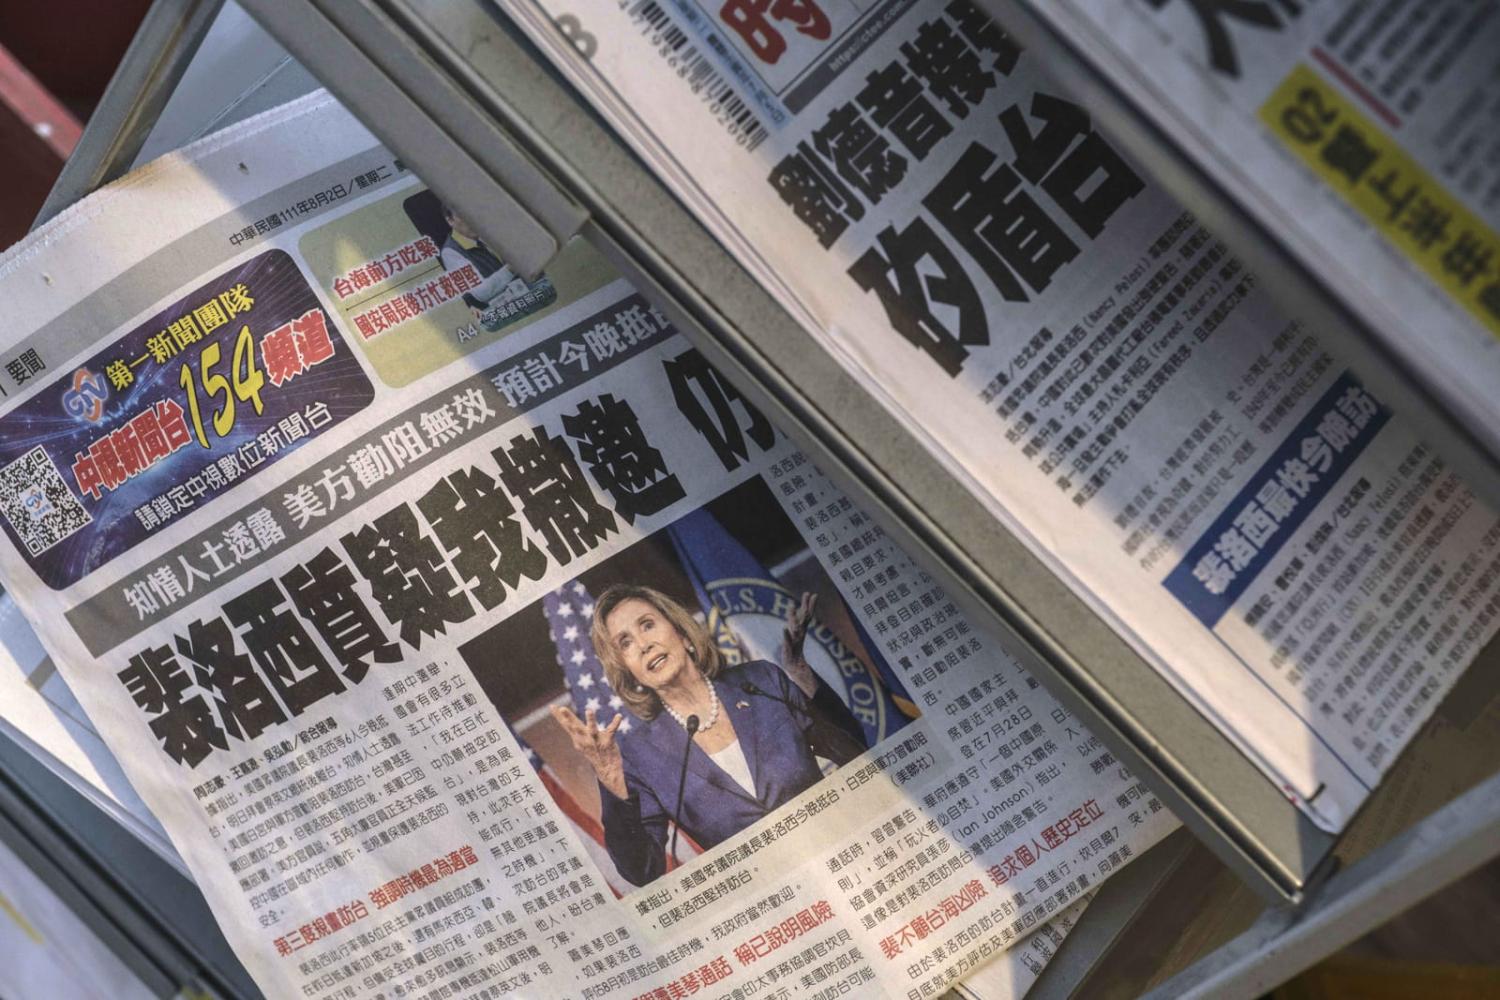 An image of US House Speaker Nancy Pelosi on the front page of a local newspaper on 2 August in Taipei, Taiwan, amid speculation she will soon visit (Lam Yik Fei/Bloomberg via Getty Images)